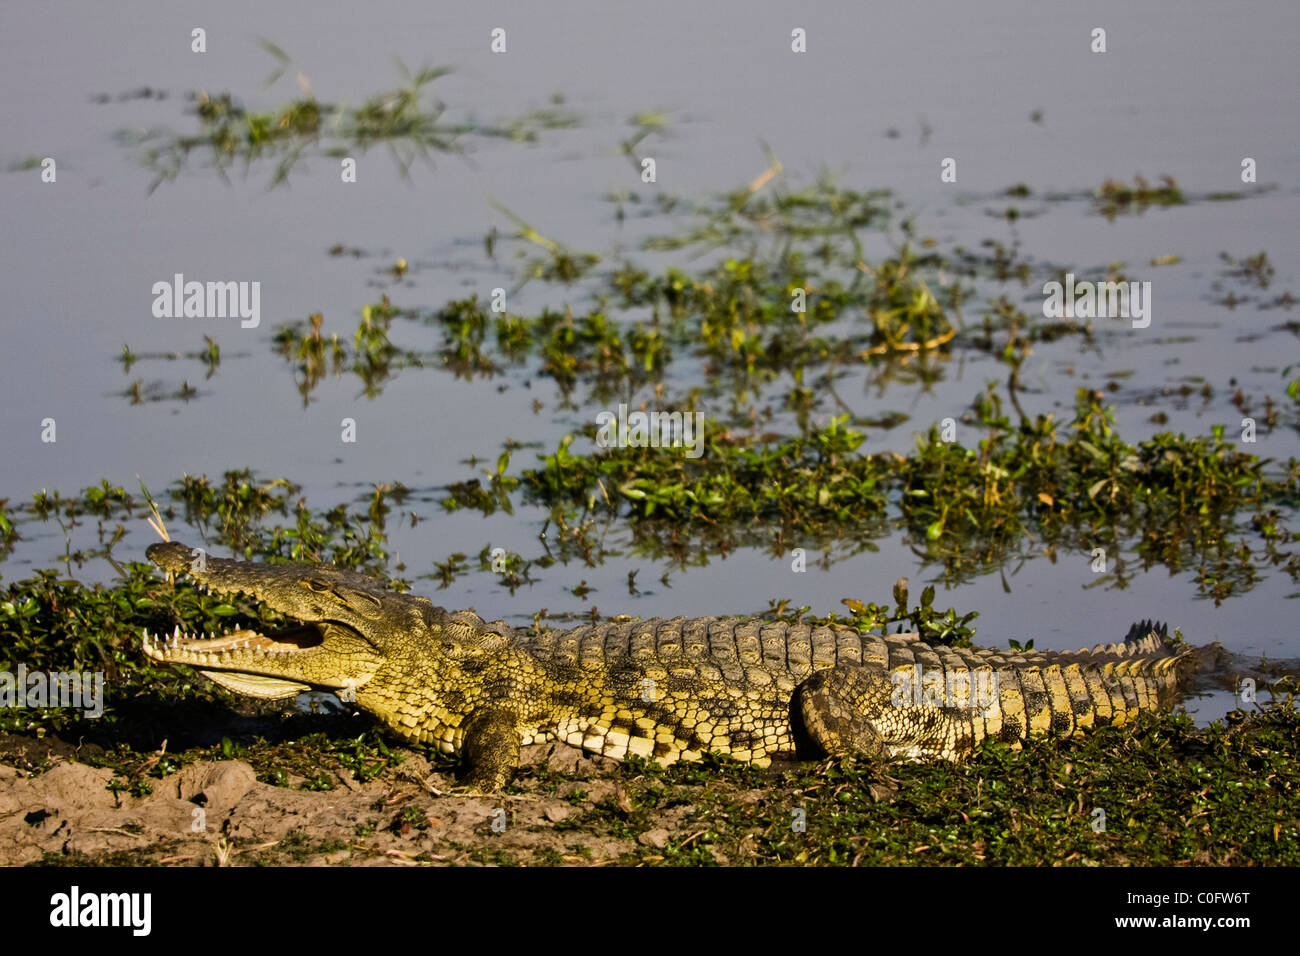 A nile crocodile near the waters edge it is facing left jaws slightly open. Stock Photo